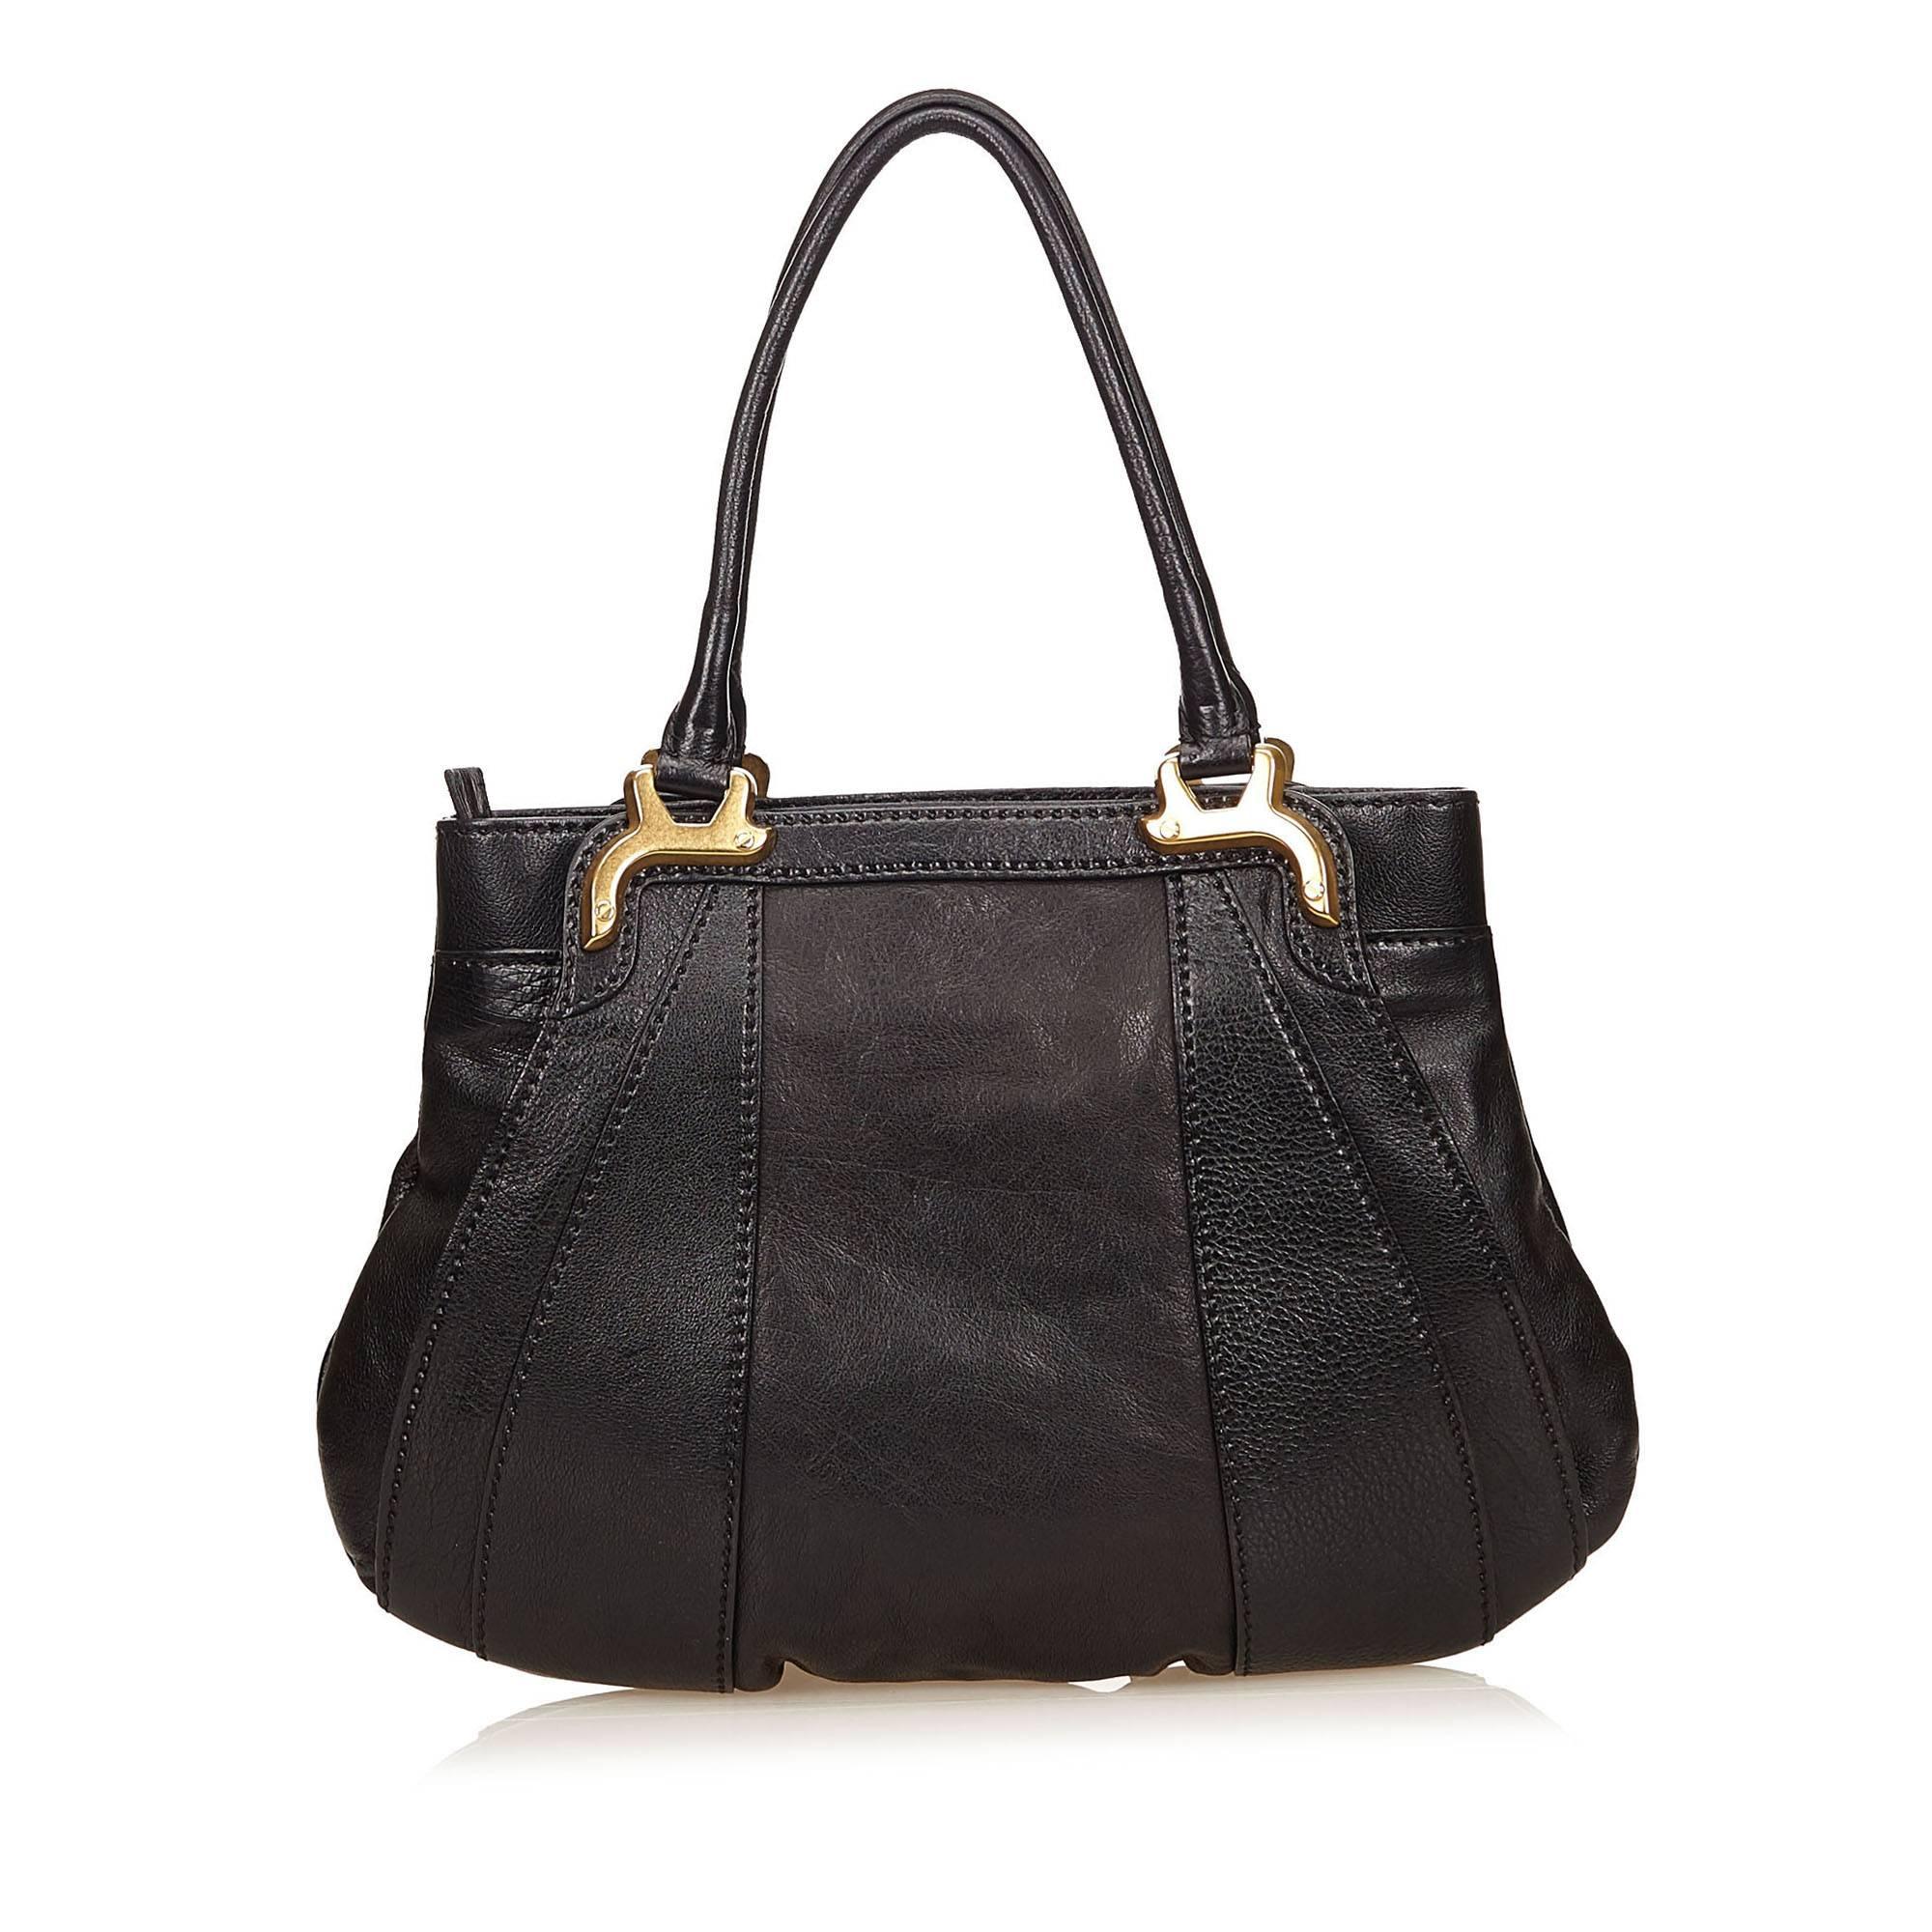 Product details:  Black leather and fabric shoulder bag by Valentino.  Accented with floral applique at front.  Dual shoulder straps.  Top zip closure.  Lined interior with inner zip pocket.  Goldtone hardware.  14